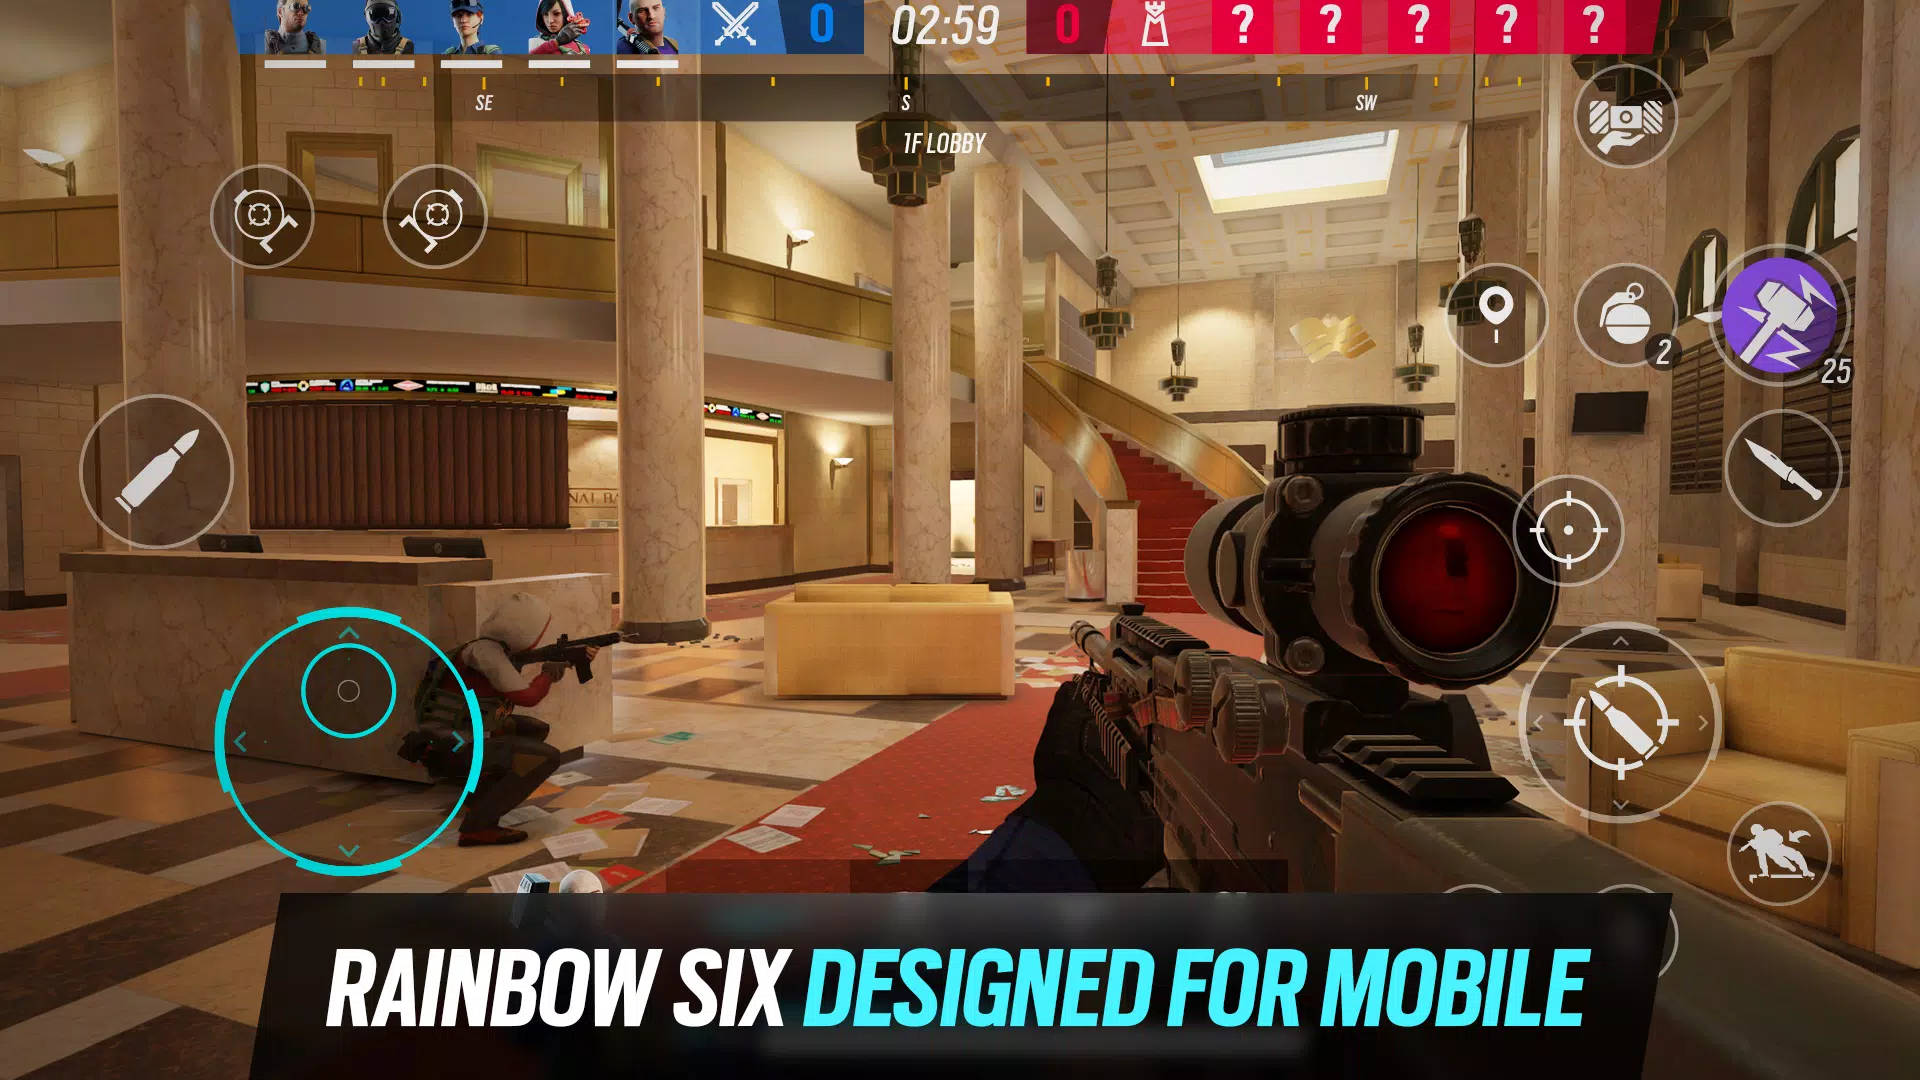 How To Access Rainbow Six Siege Mobile Early